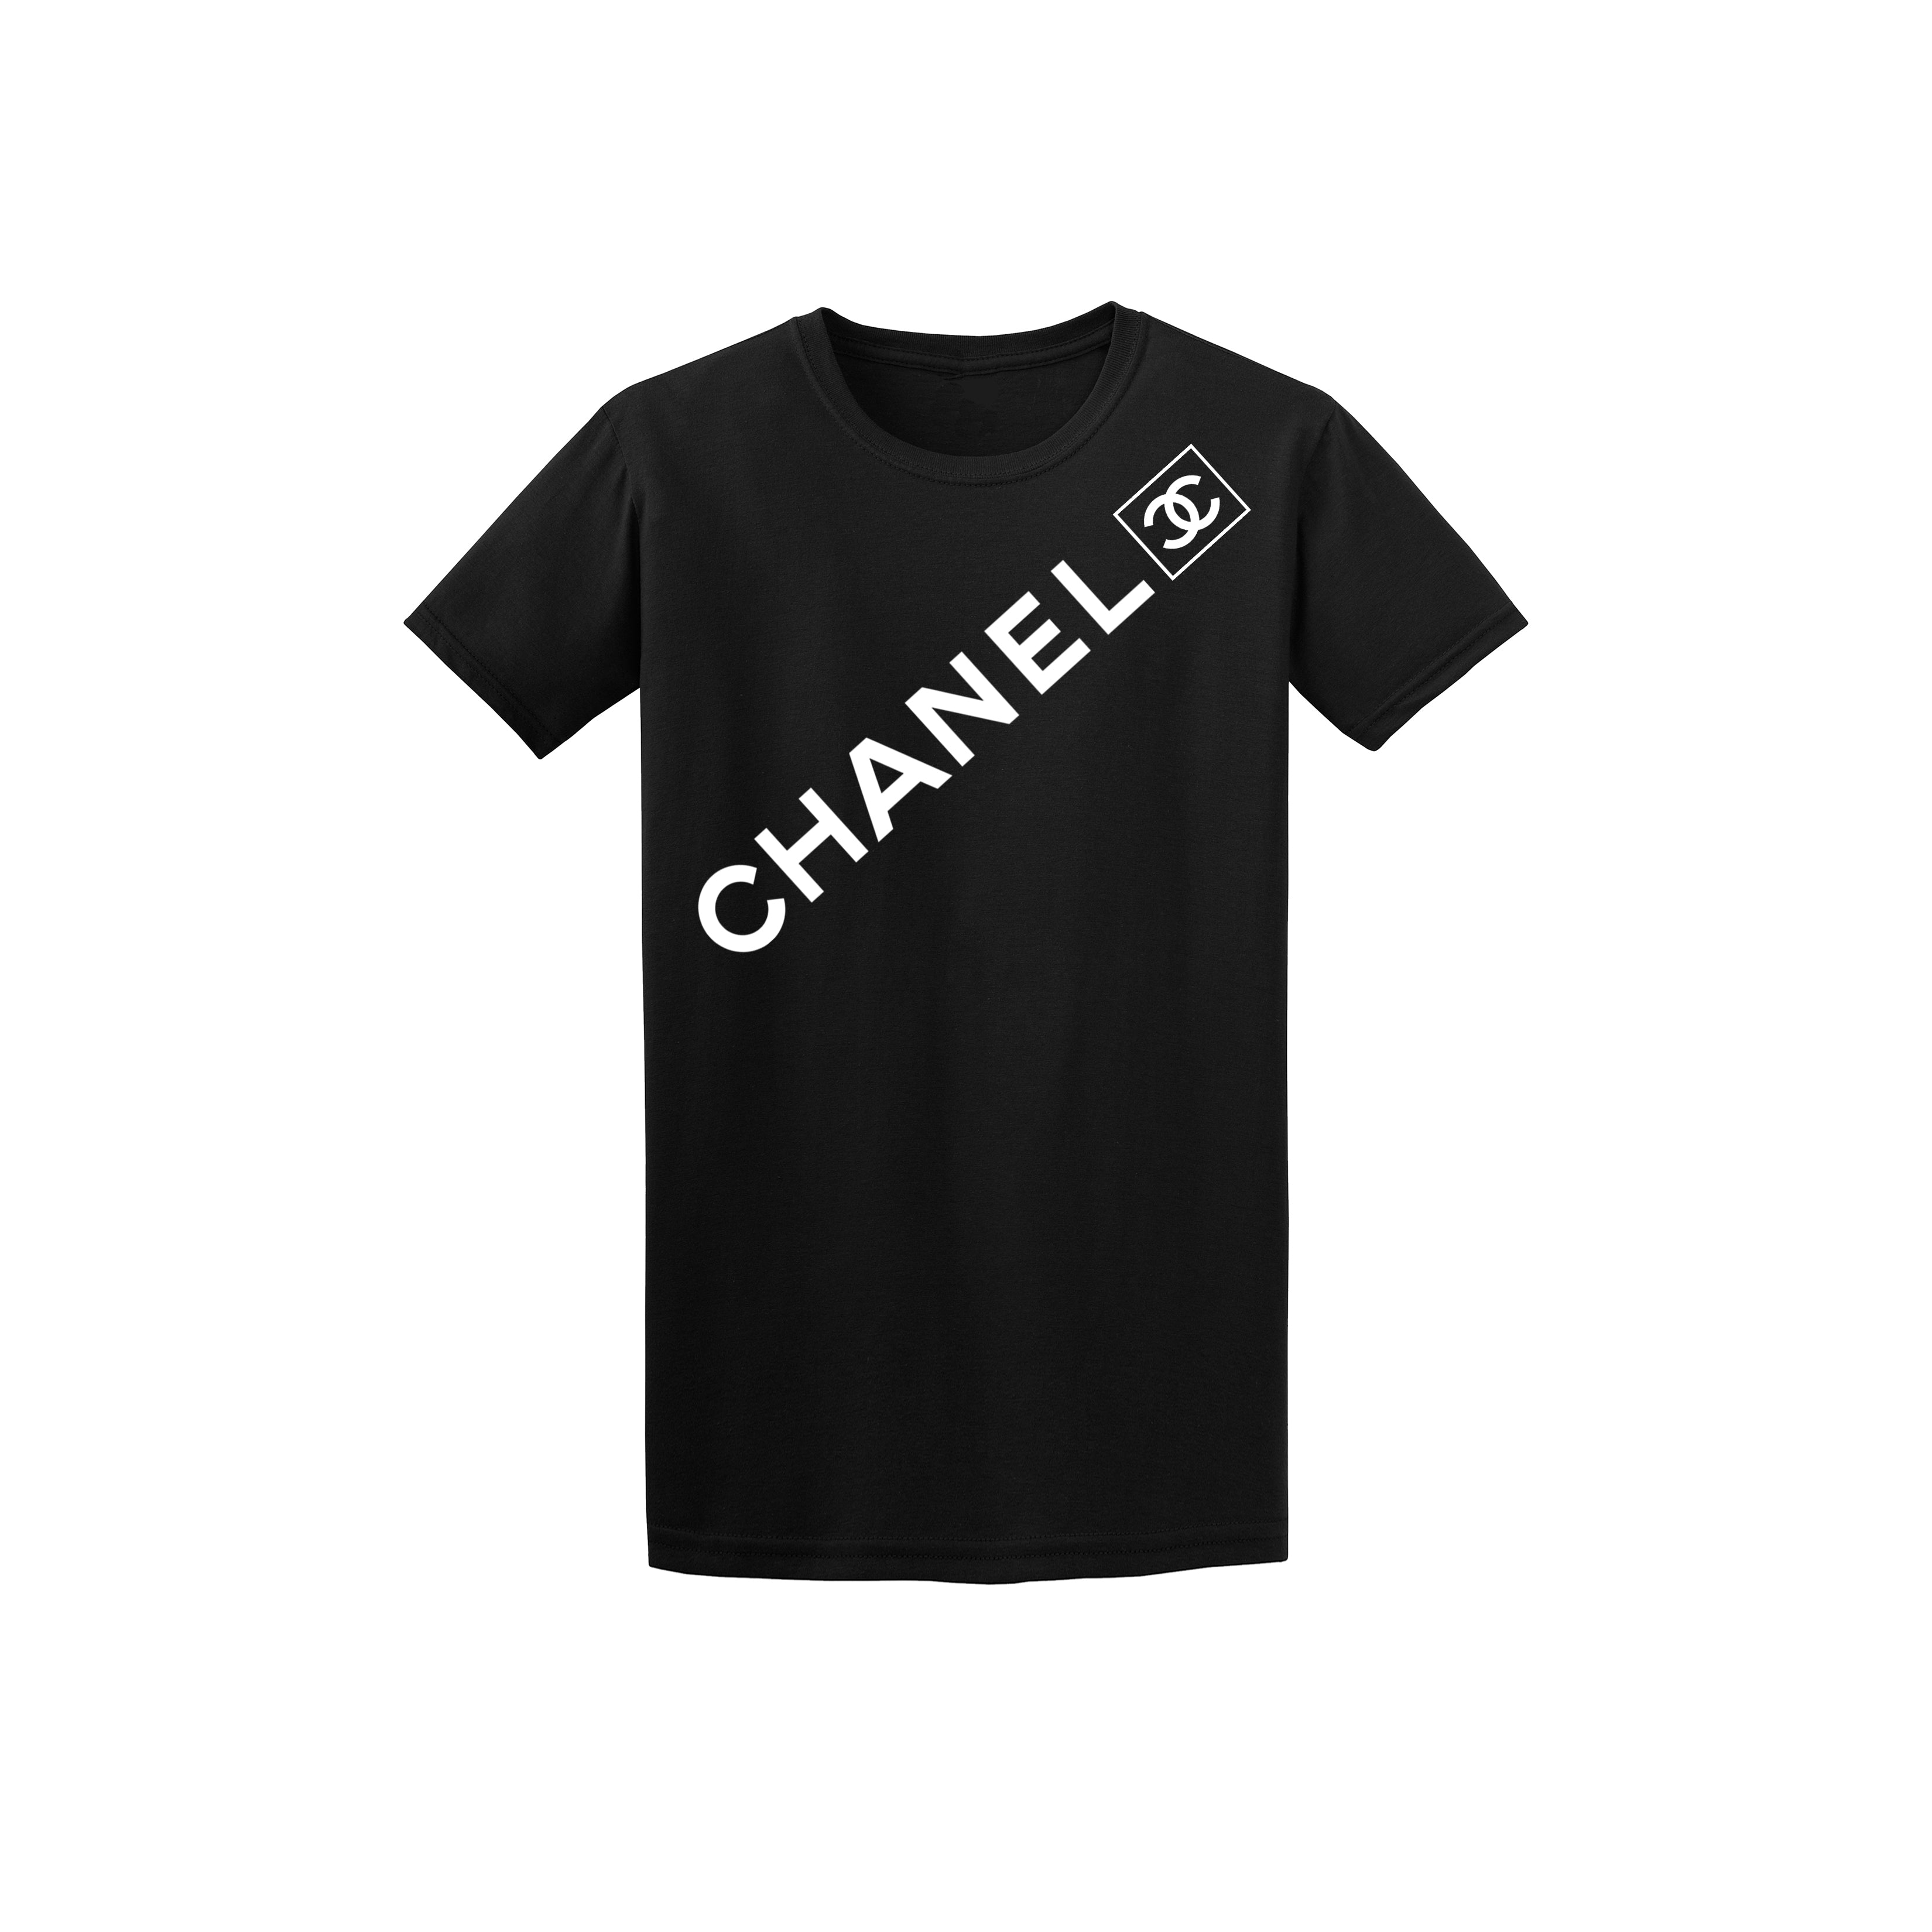 Chanel's $4,450 Embroidered F1 T-Shirt Is Taking Over the Internet